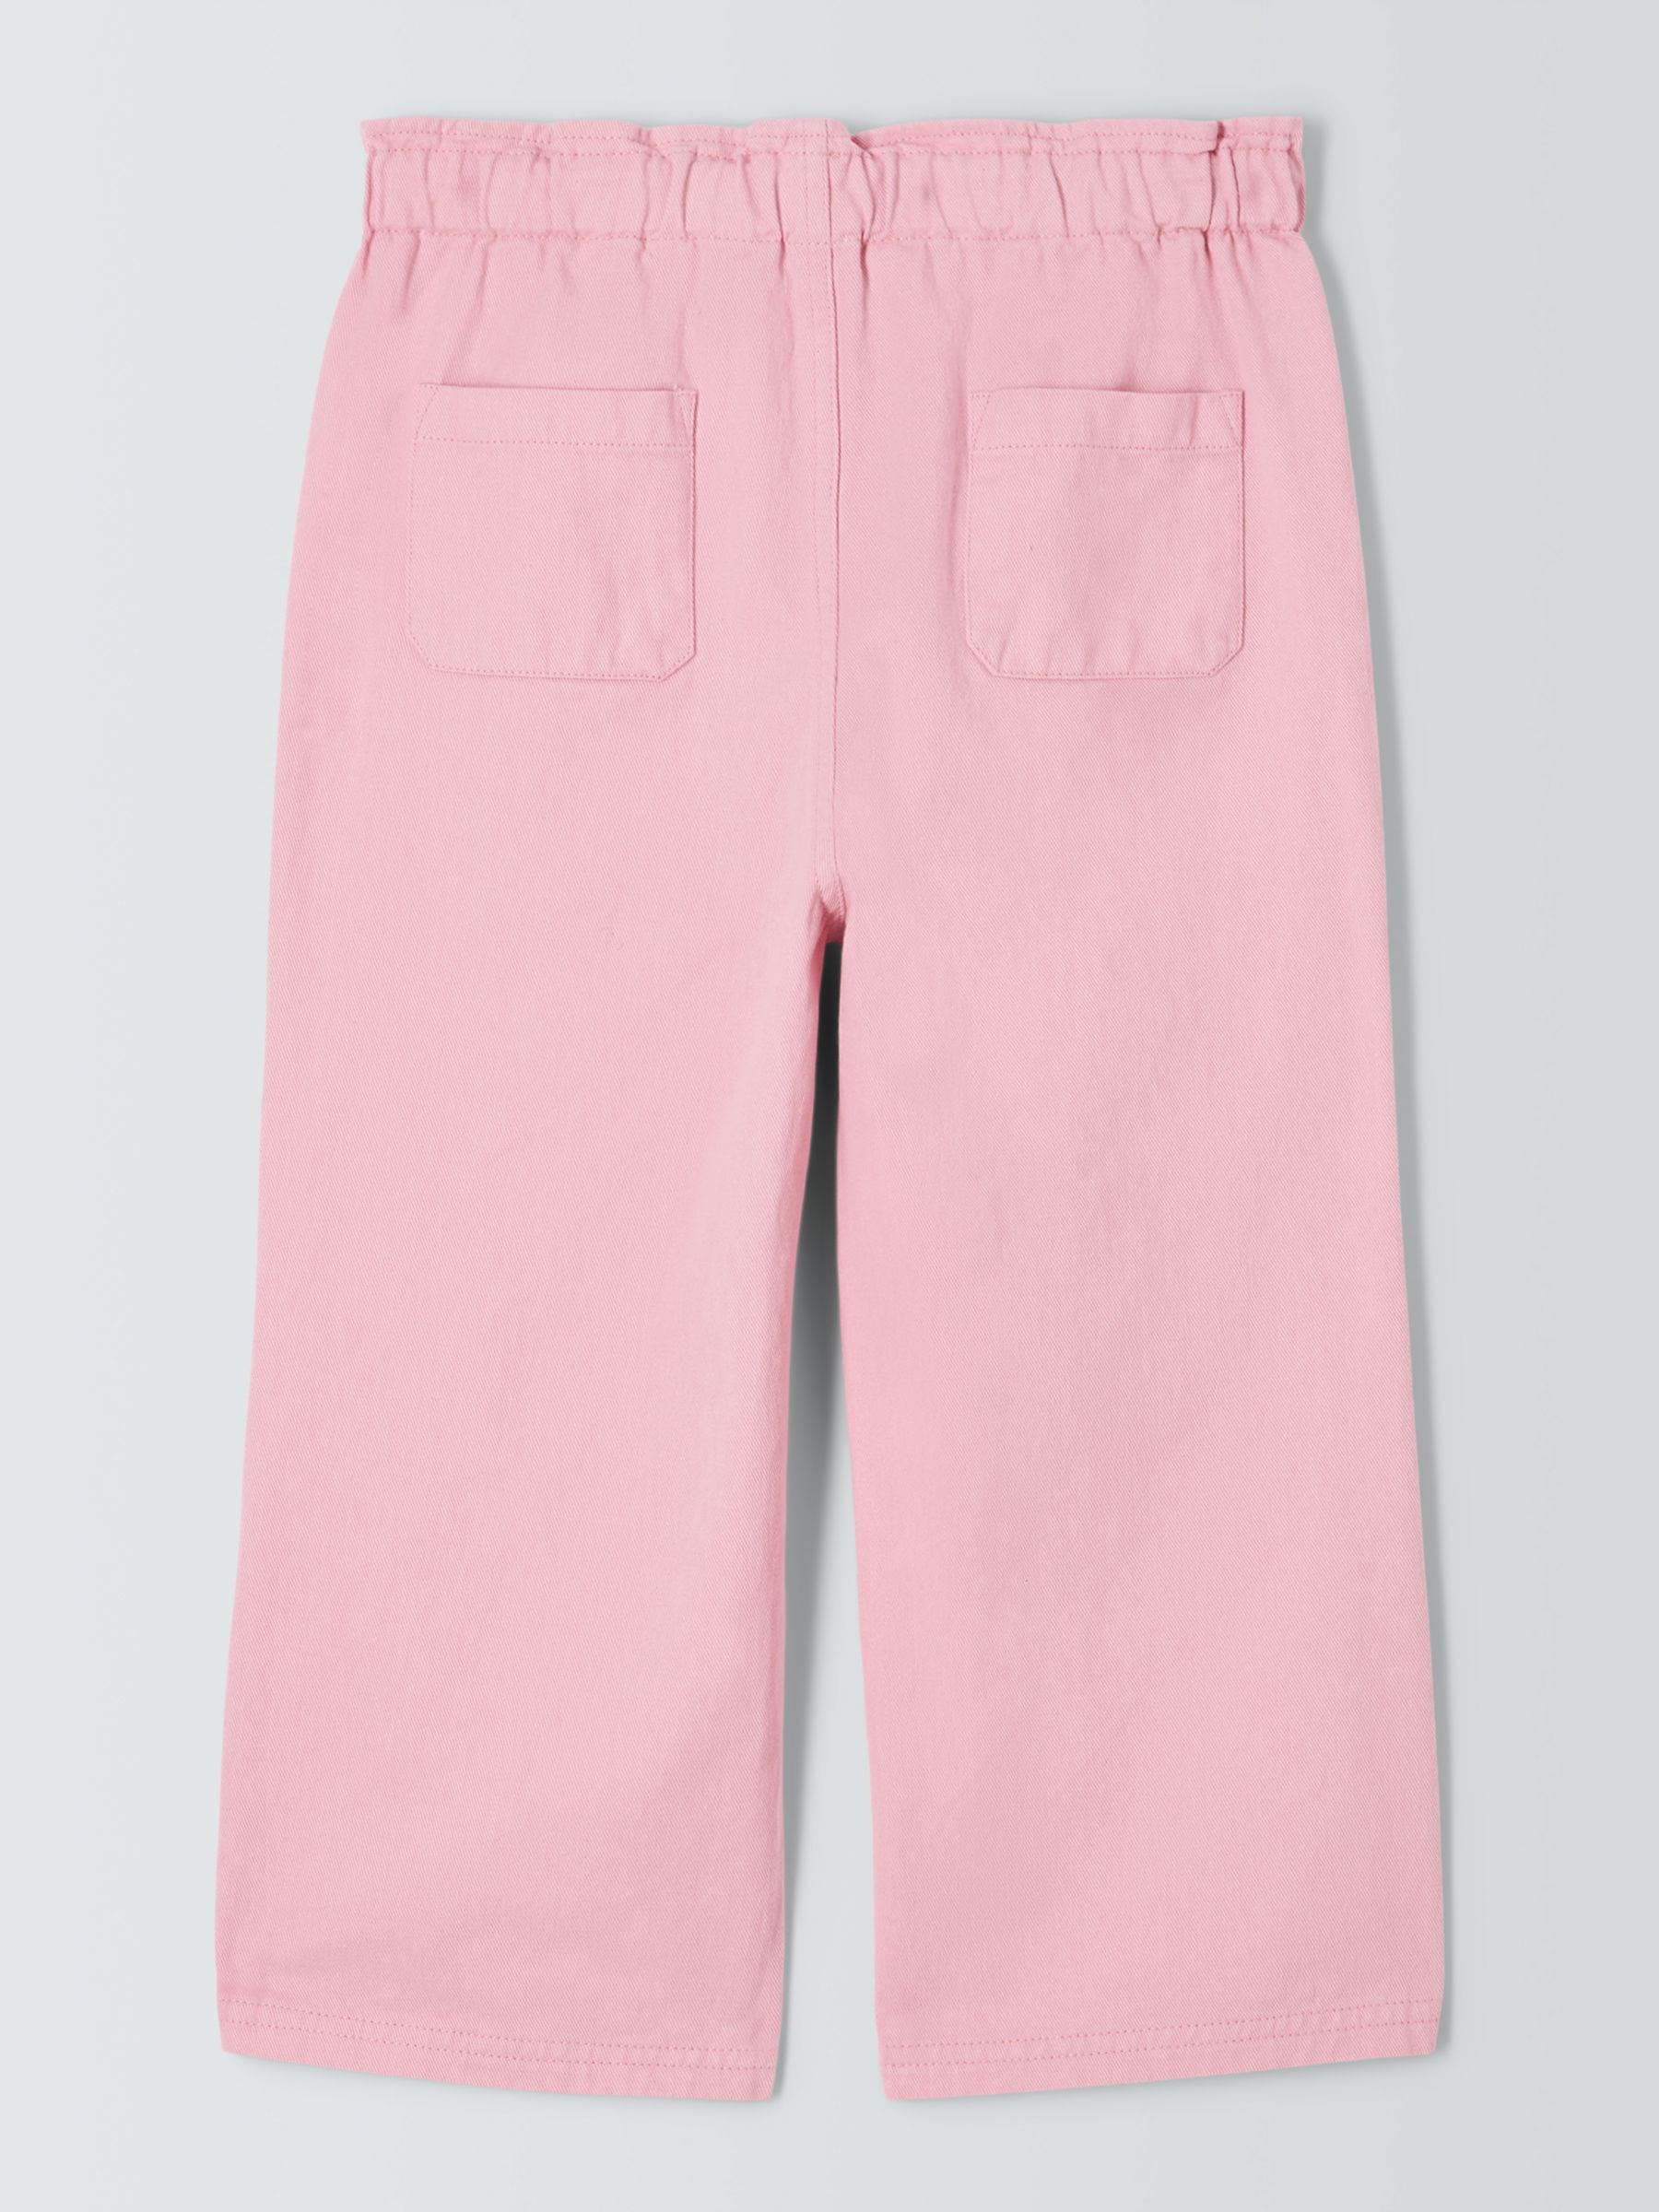 John Lewis Baby Cotton Trousers, Pink, 9-12 months